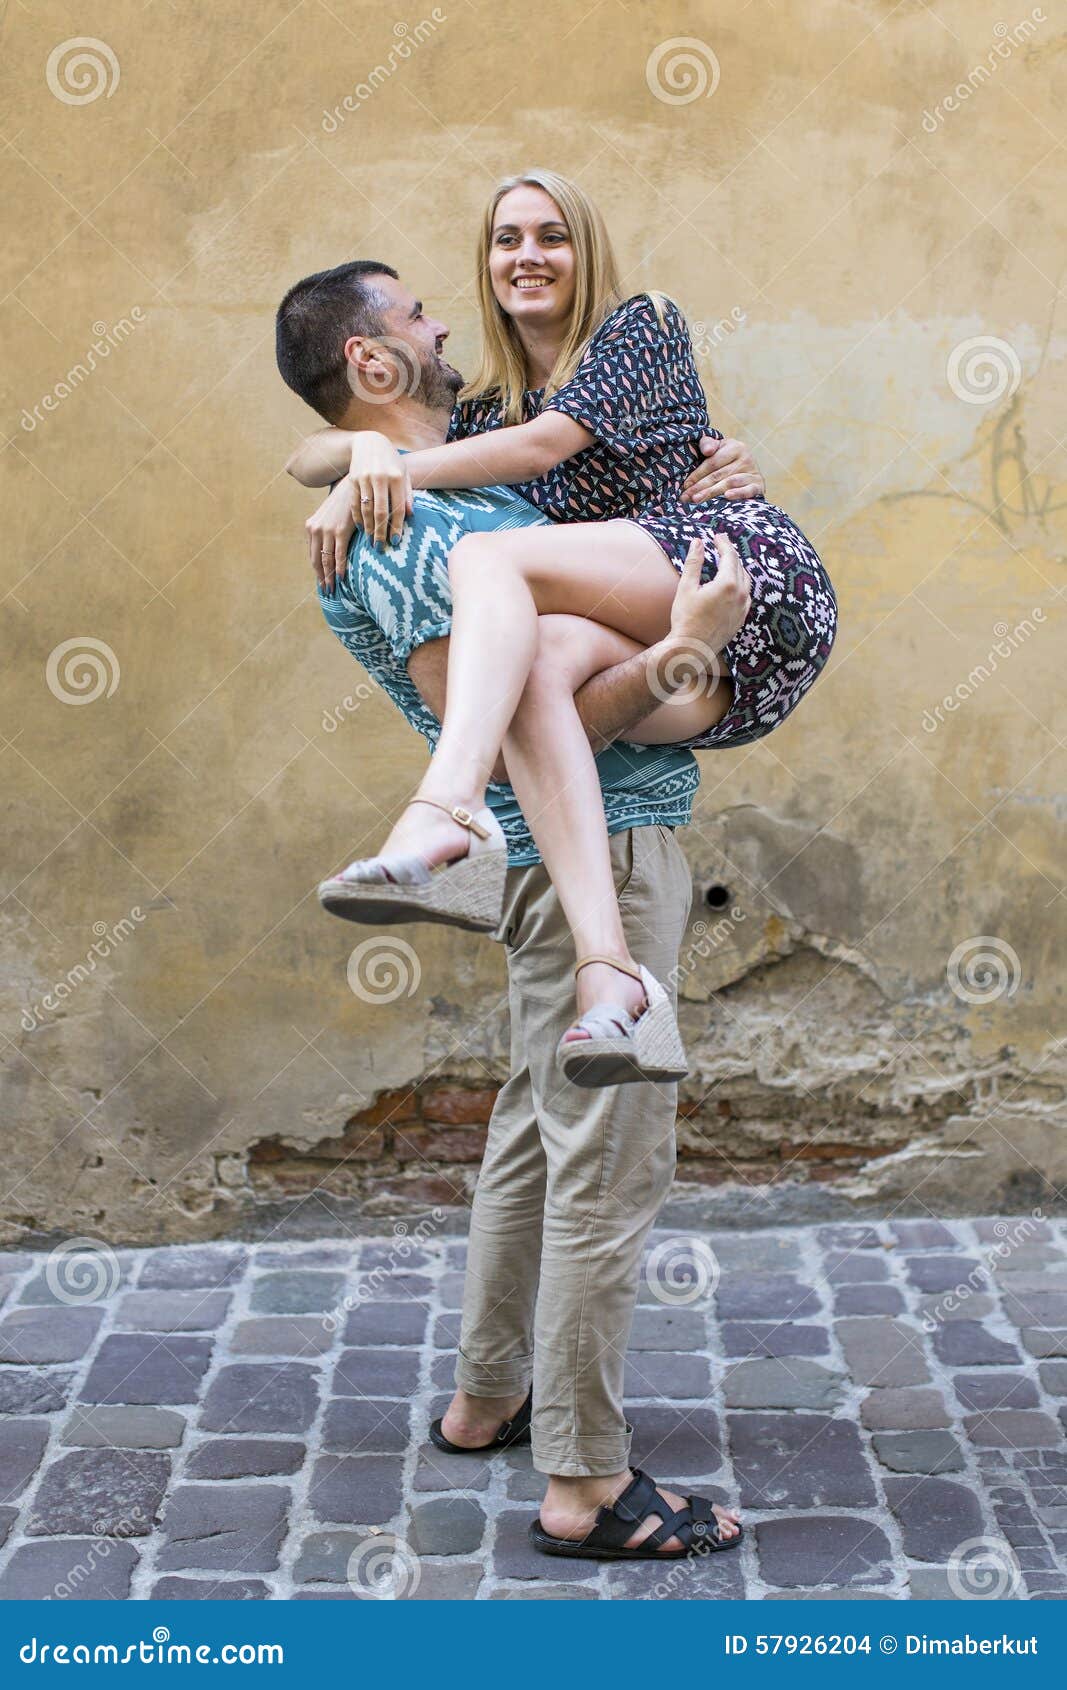 https://thumbs.dreamstime.com/z/happy-young-couple-man-holding-woman-his-arms-love-men-women-57926204.jpg